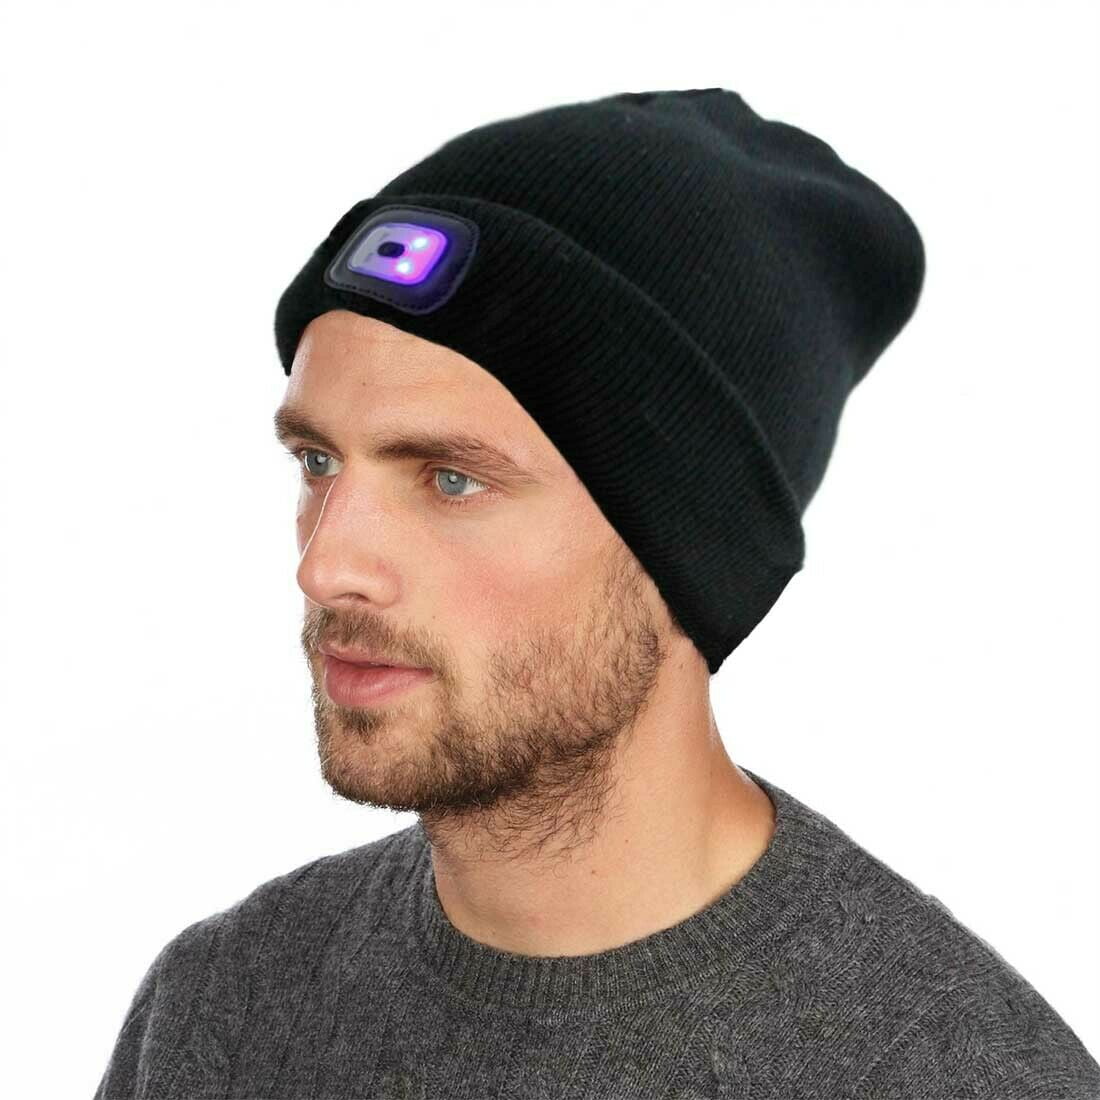 Women Men Outdoor Sports Winter Warm Knitted Beanie Cap Hat With 4LED Light UK 